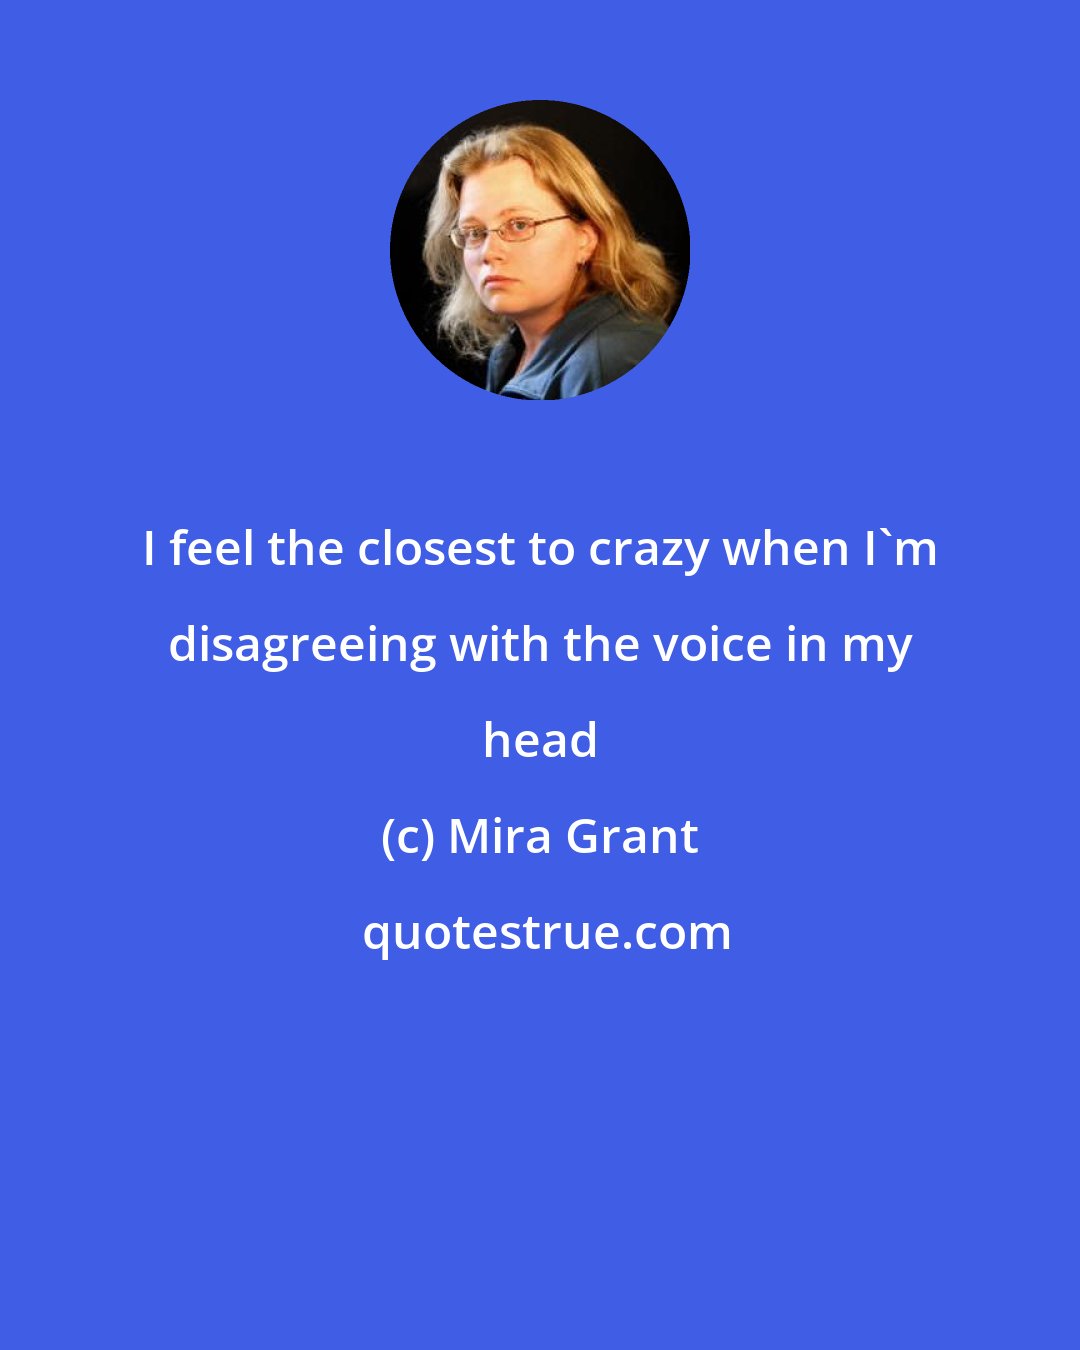 Mira Grant: I feel the closest to crazy when I'm disagreeing with the voice in my head